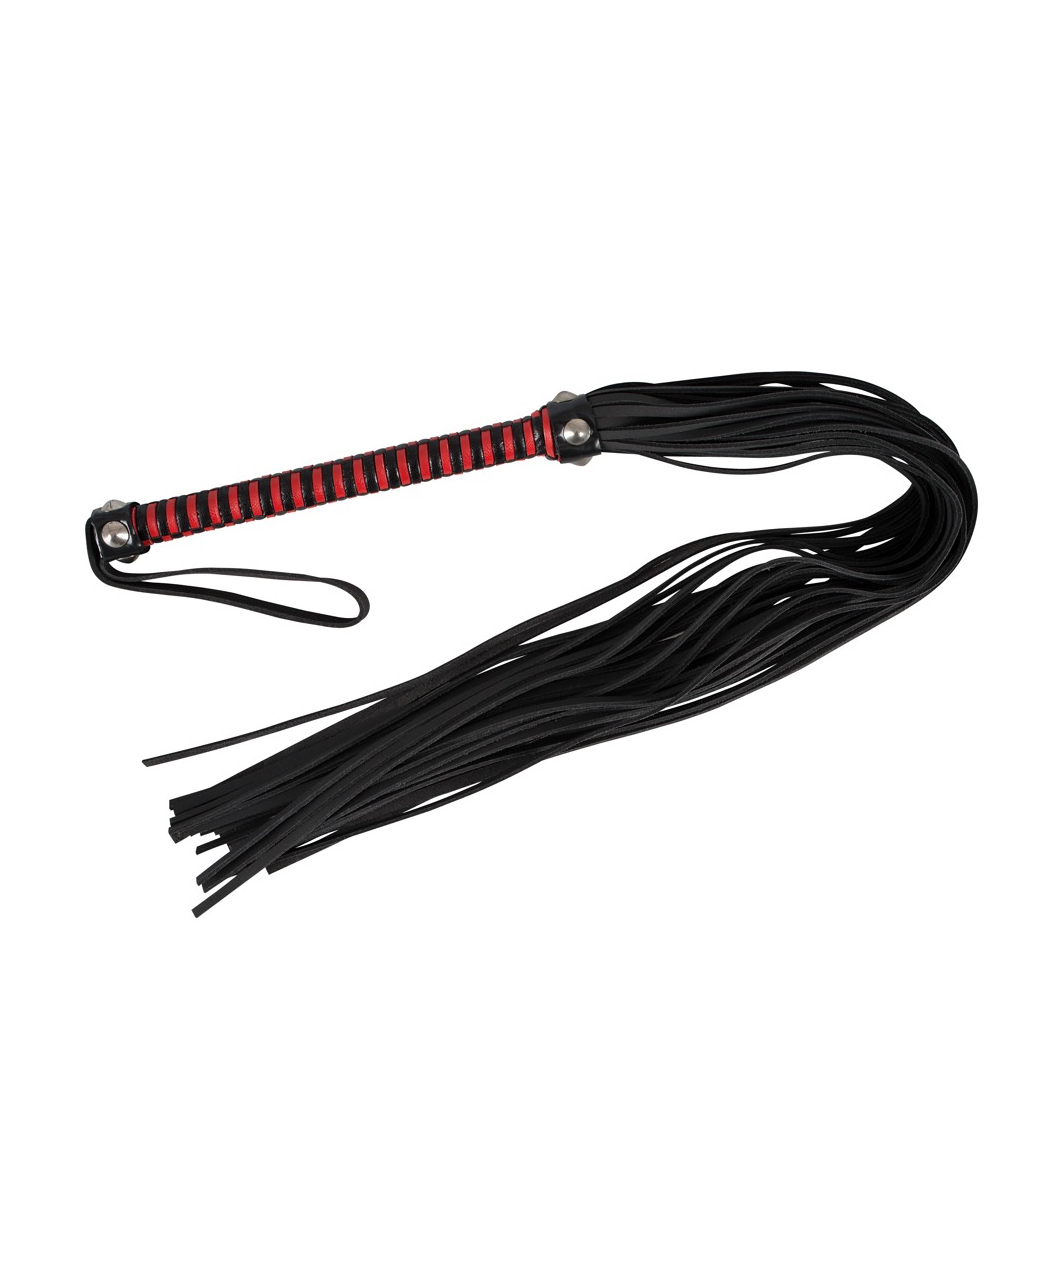 Zado leather whip with black & red weaved handle